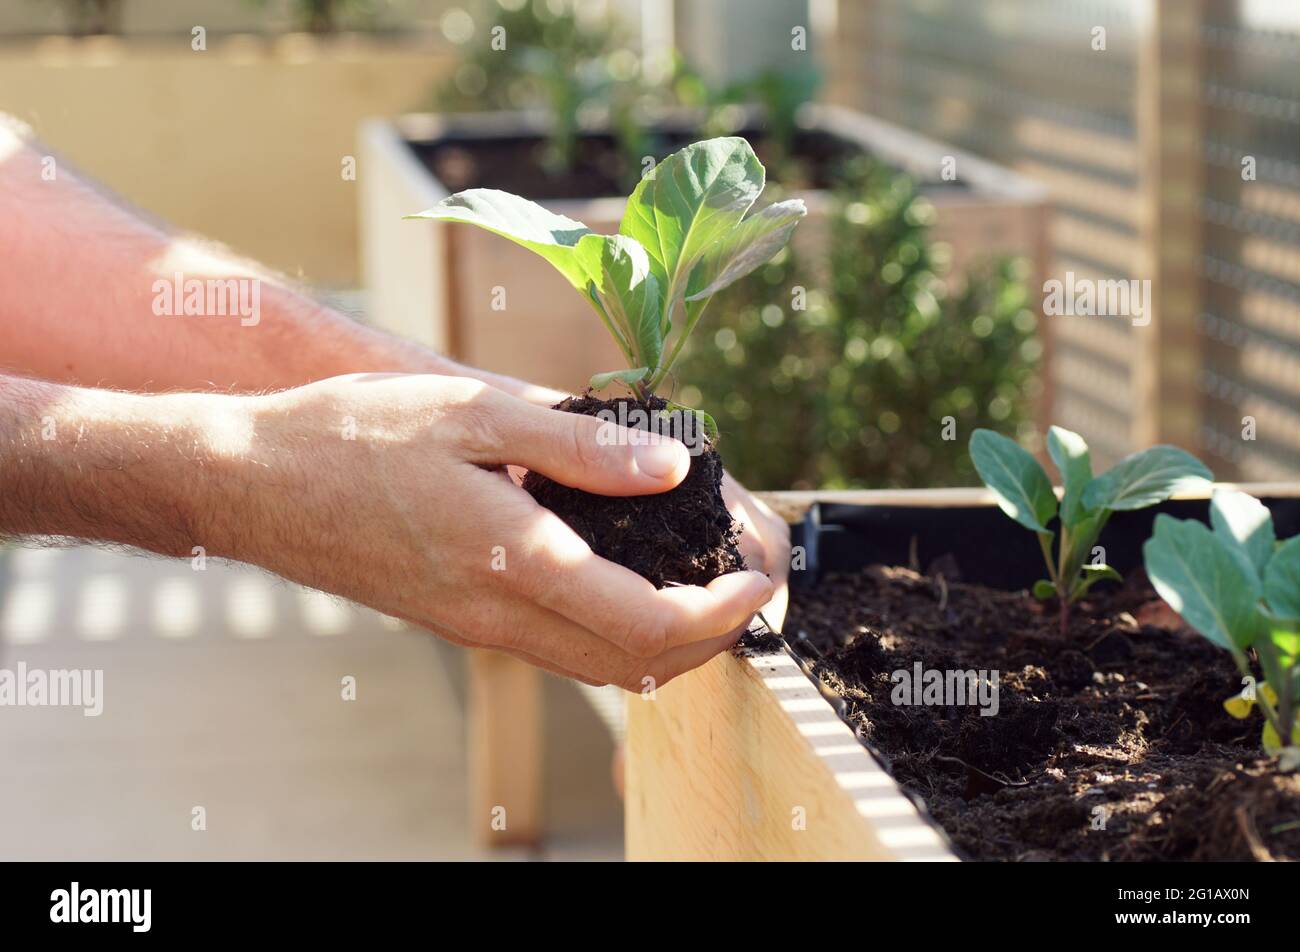 hands planting young vegetables such as cabbage and cauliflower in a raised bed on a balcony Stock Photo